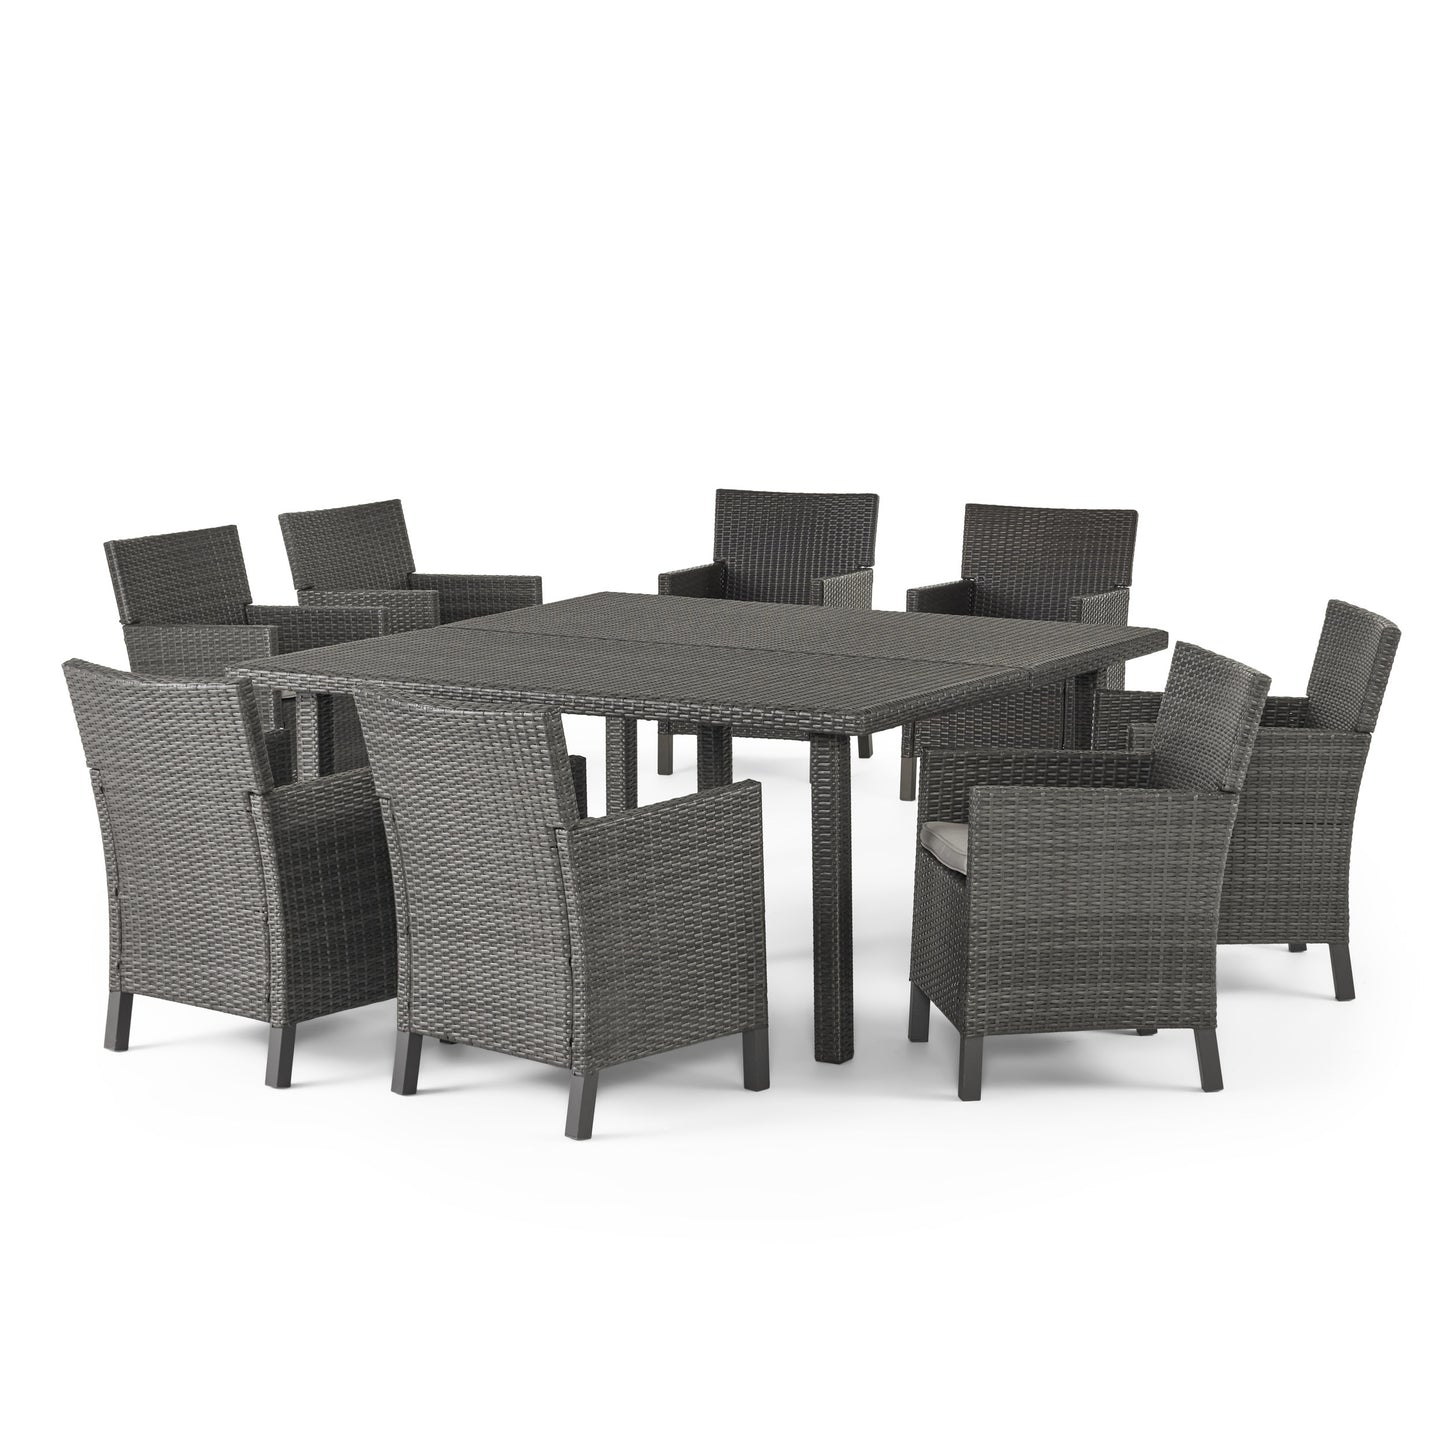 Winford Outdoor 9 Piece Wicker Dining Set with Water Resistant Cushions